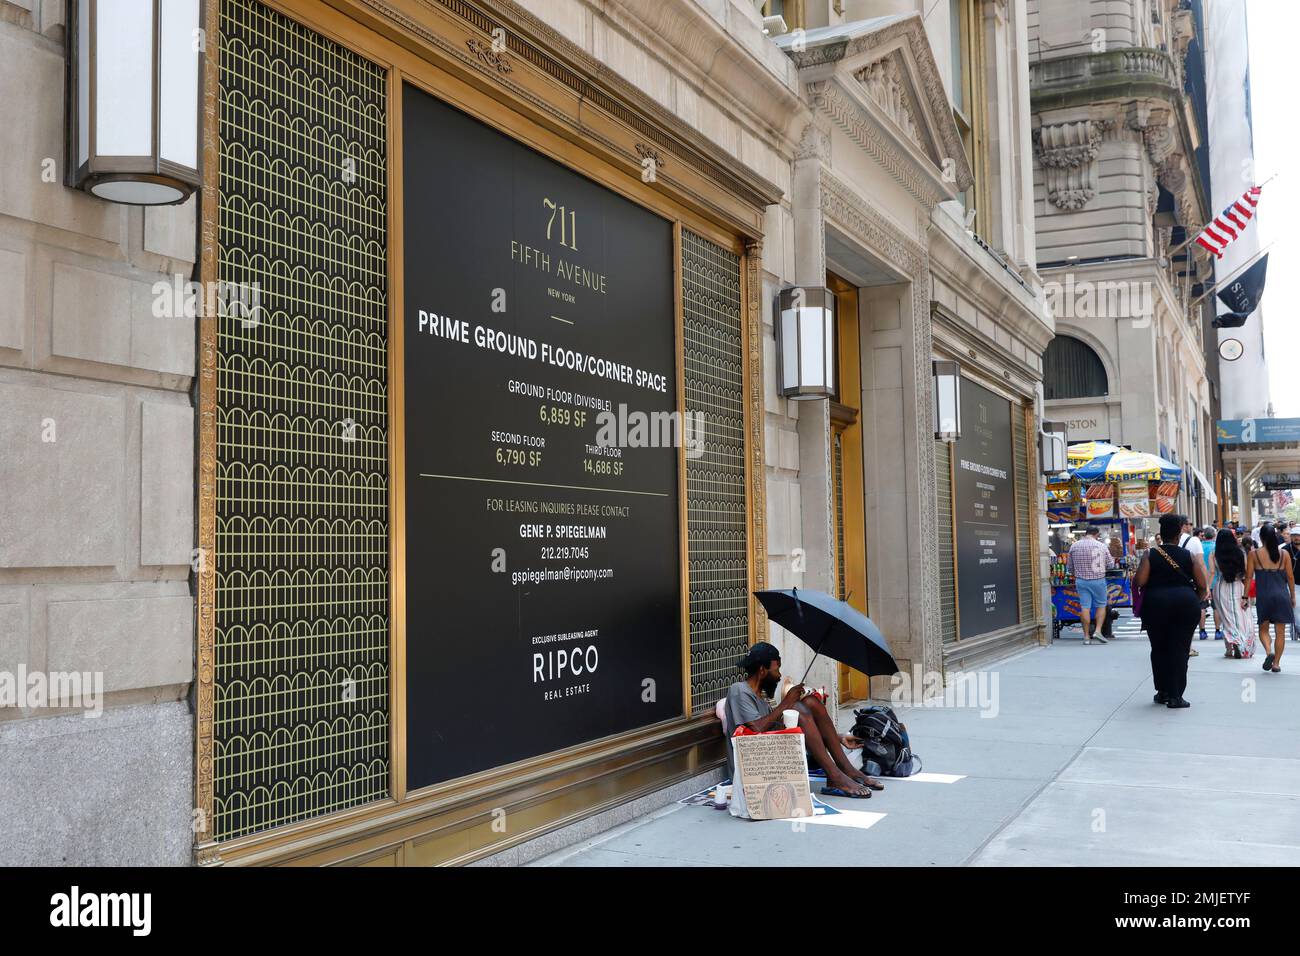 Tommy Hilfiger Closes Flagship Store in New York